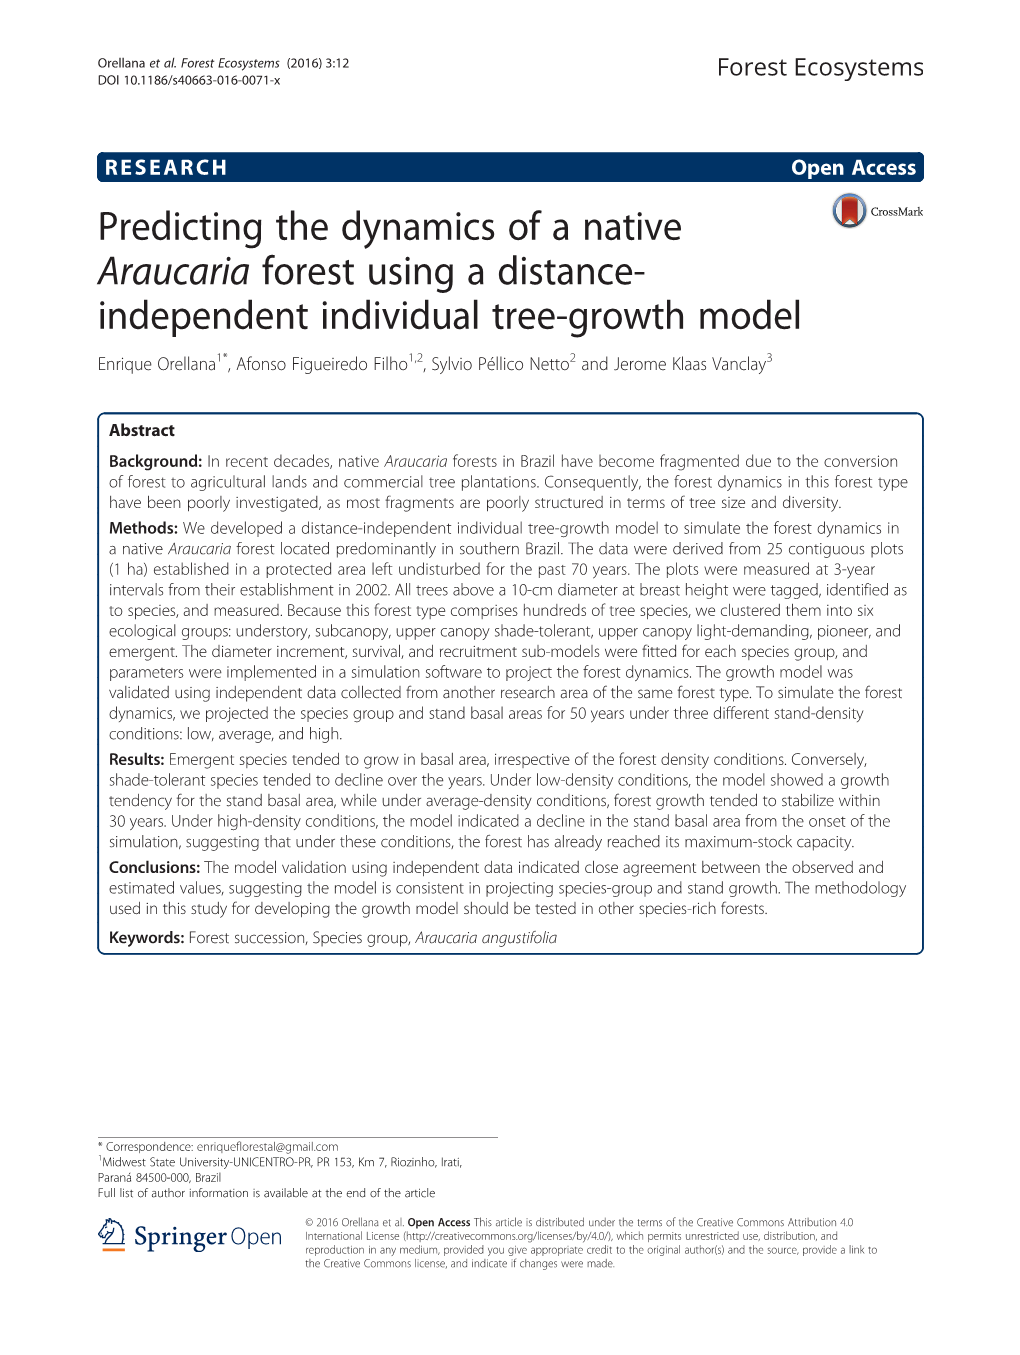 Predicting the Dynamics of a Native Araucaria Forest Using a Distance-Independent Individual Tree-Growth Model